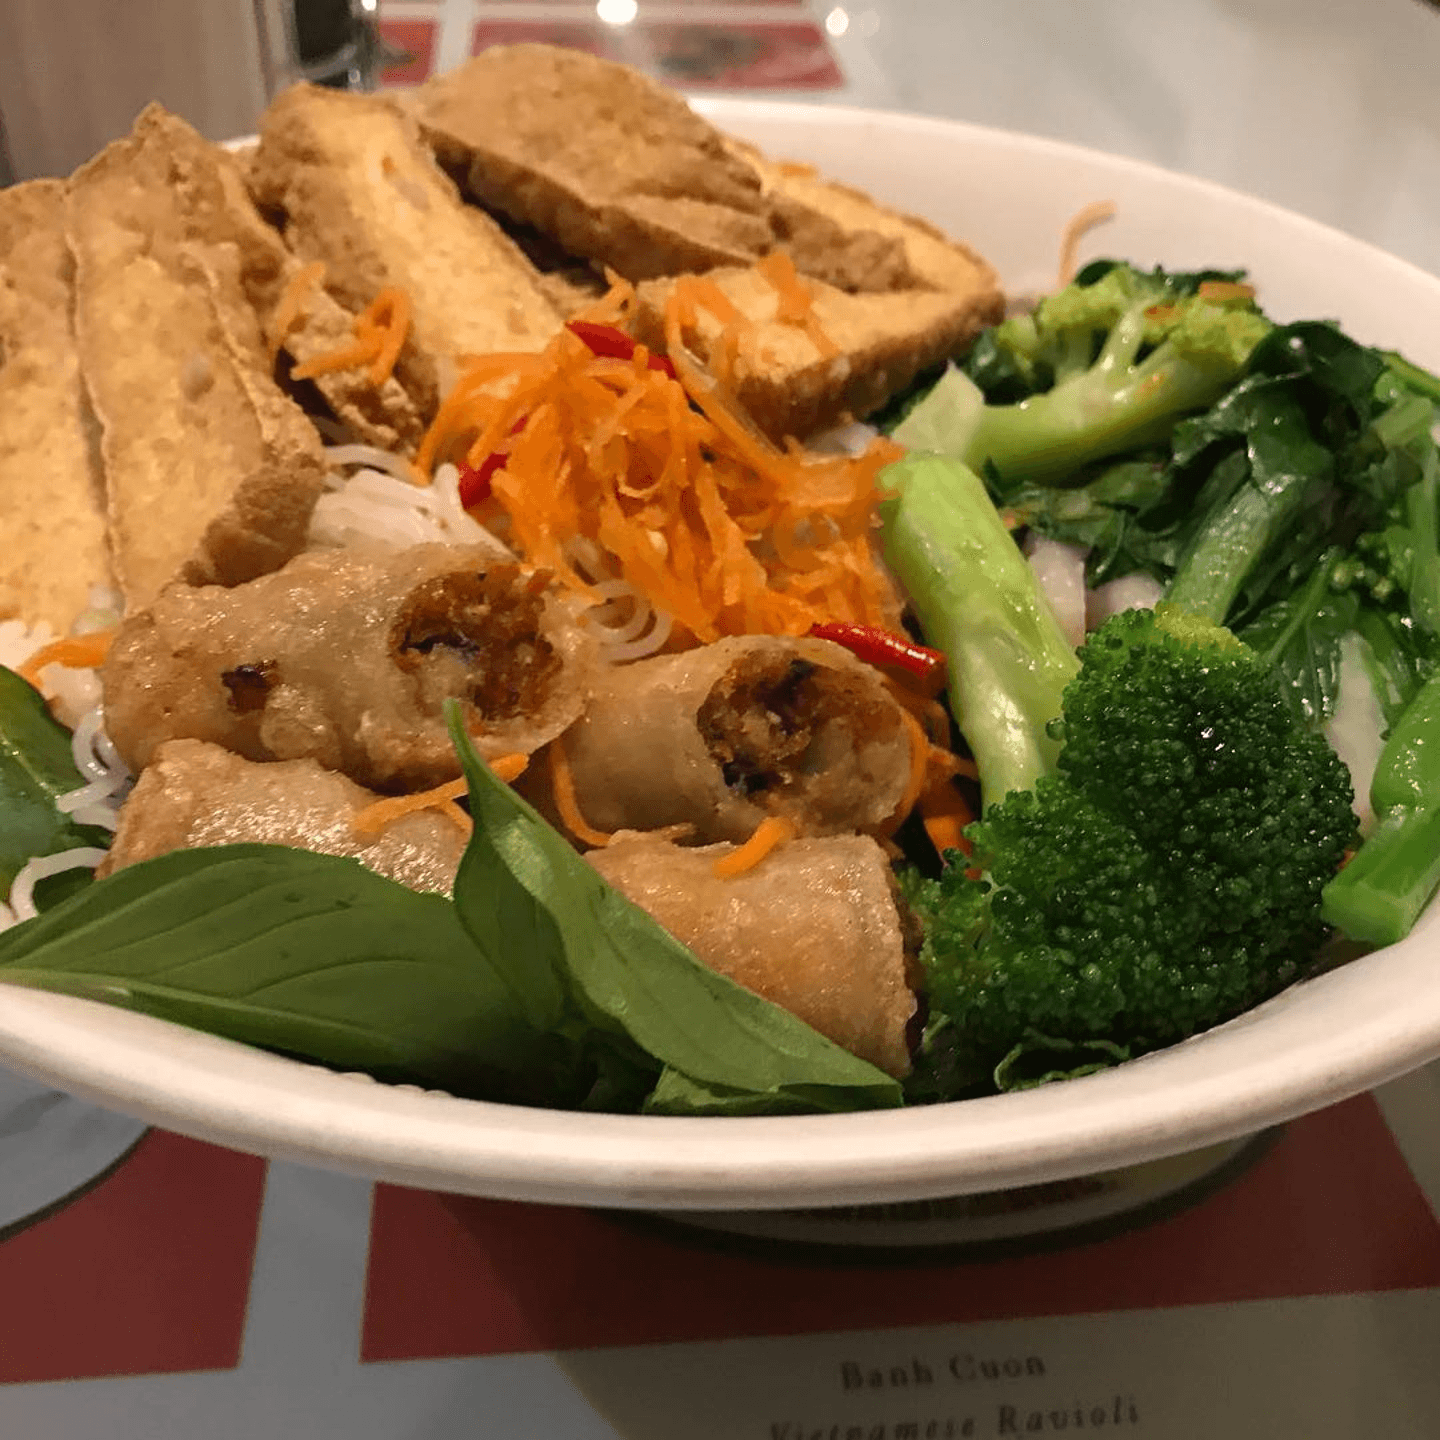 Our Signature Spring Rolls and Steamed Vegetables